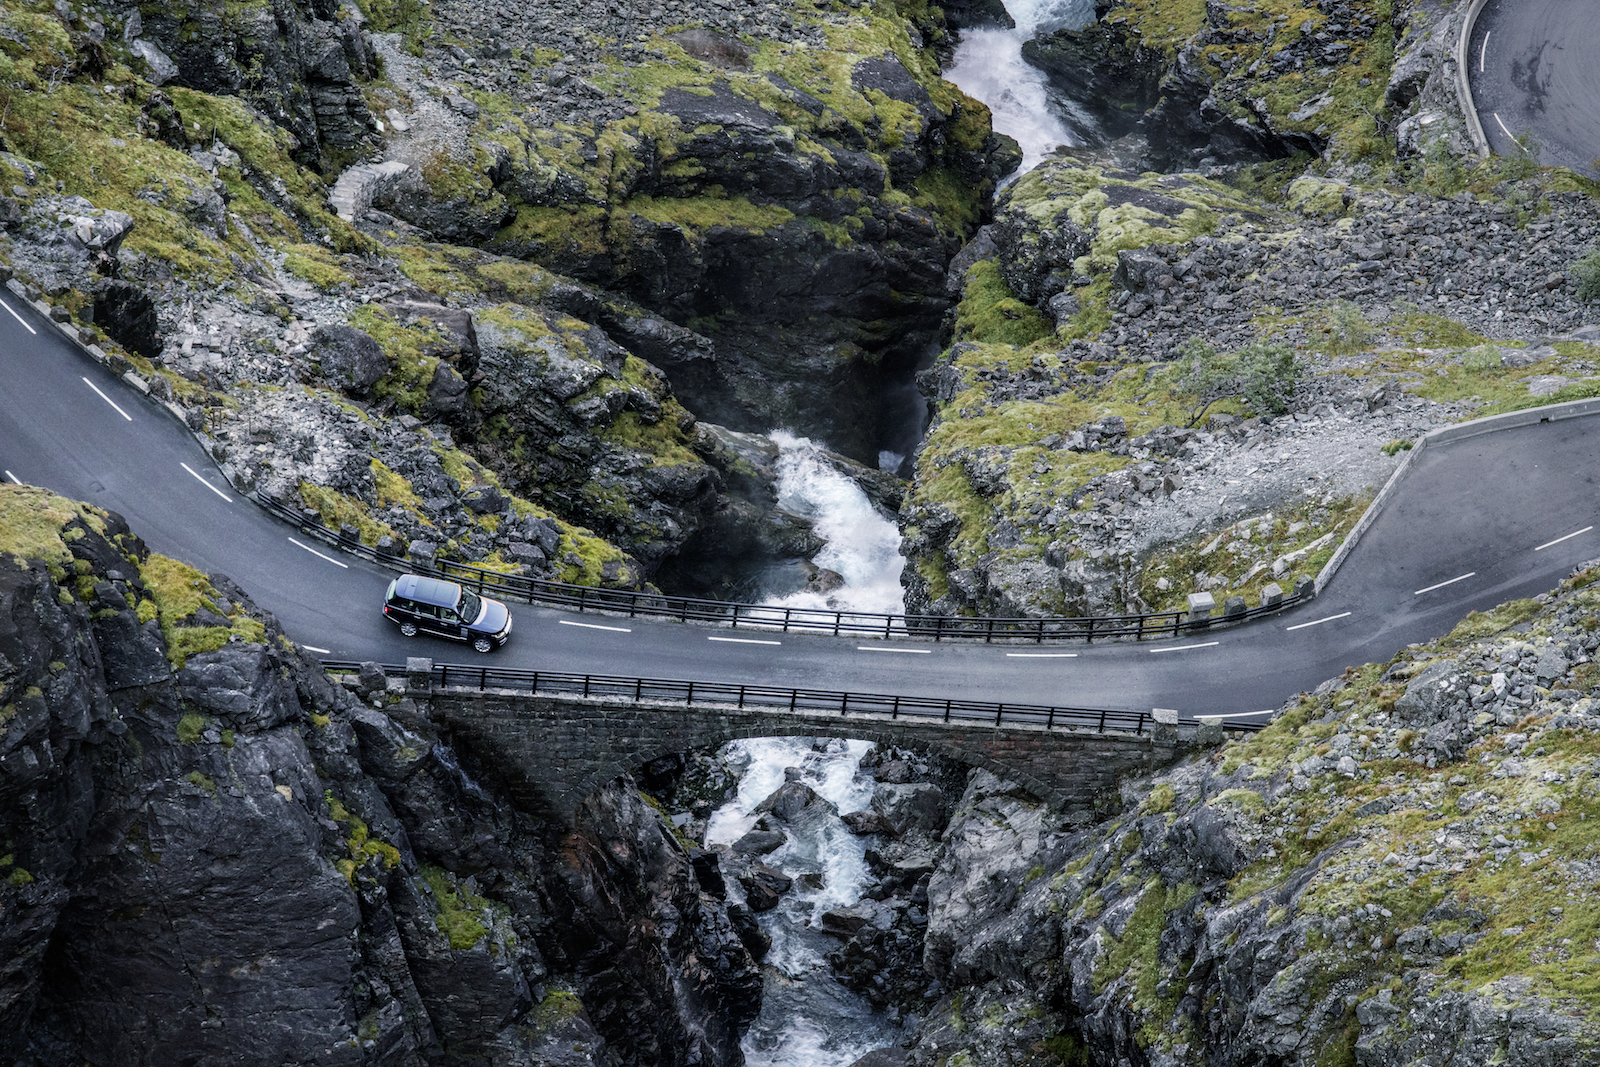 NORWAY. 2016. Trollstigen.  The famous Trollstigen road, a series of switchbacks winding its way through a steep cliffside near Åndalsnes. Photographed on assignment from Land Rover.